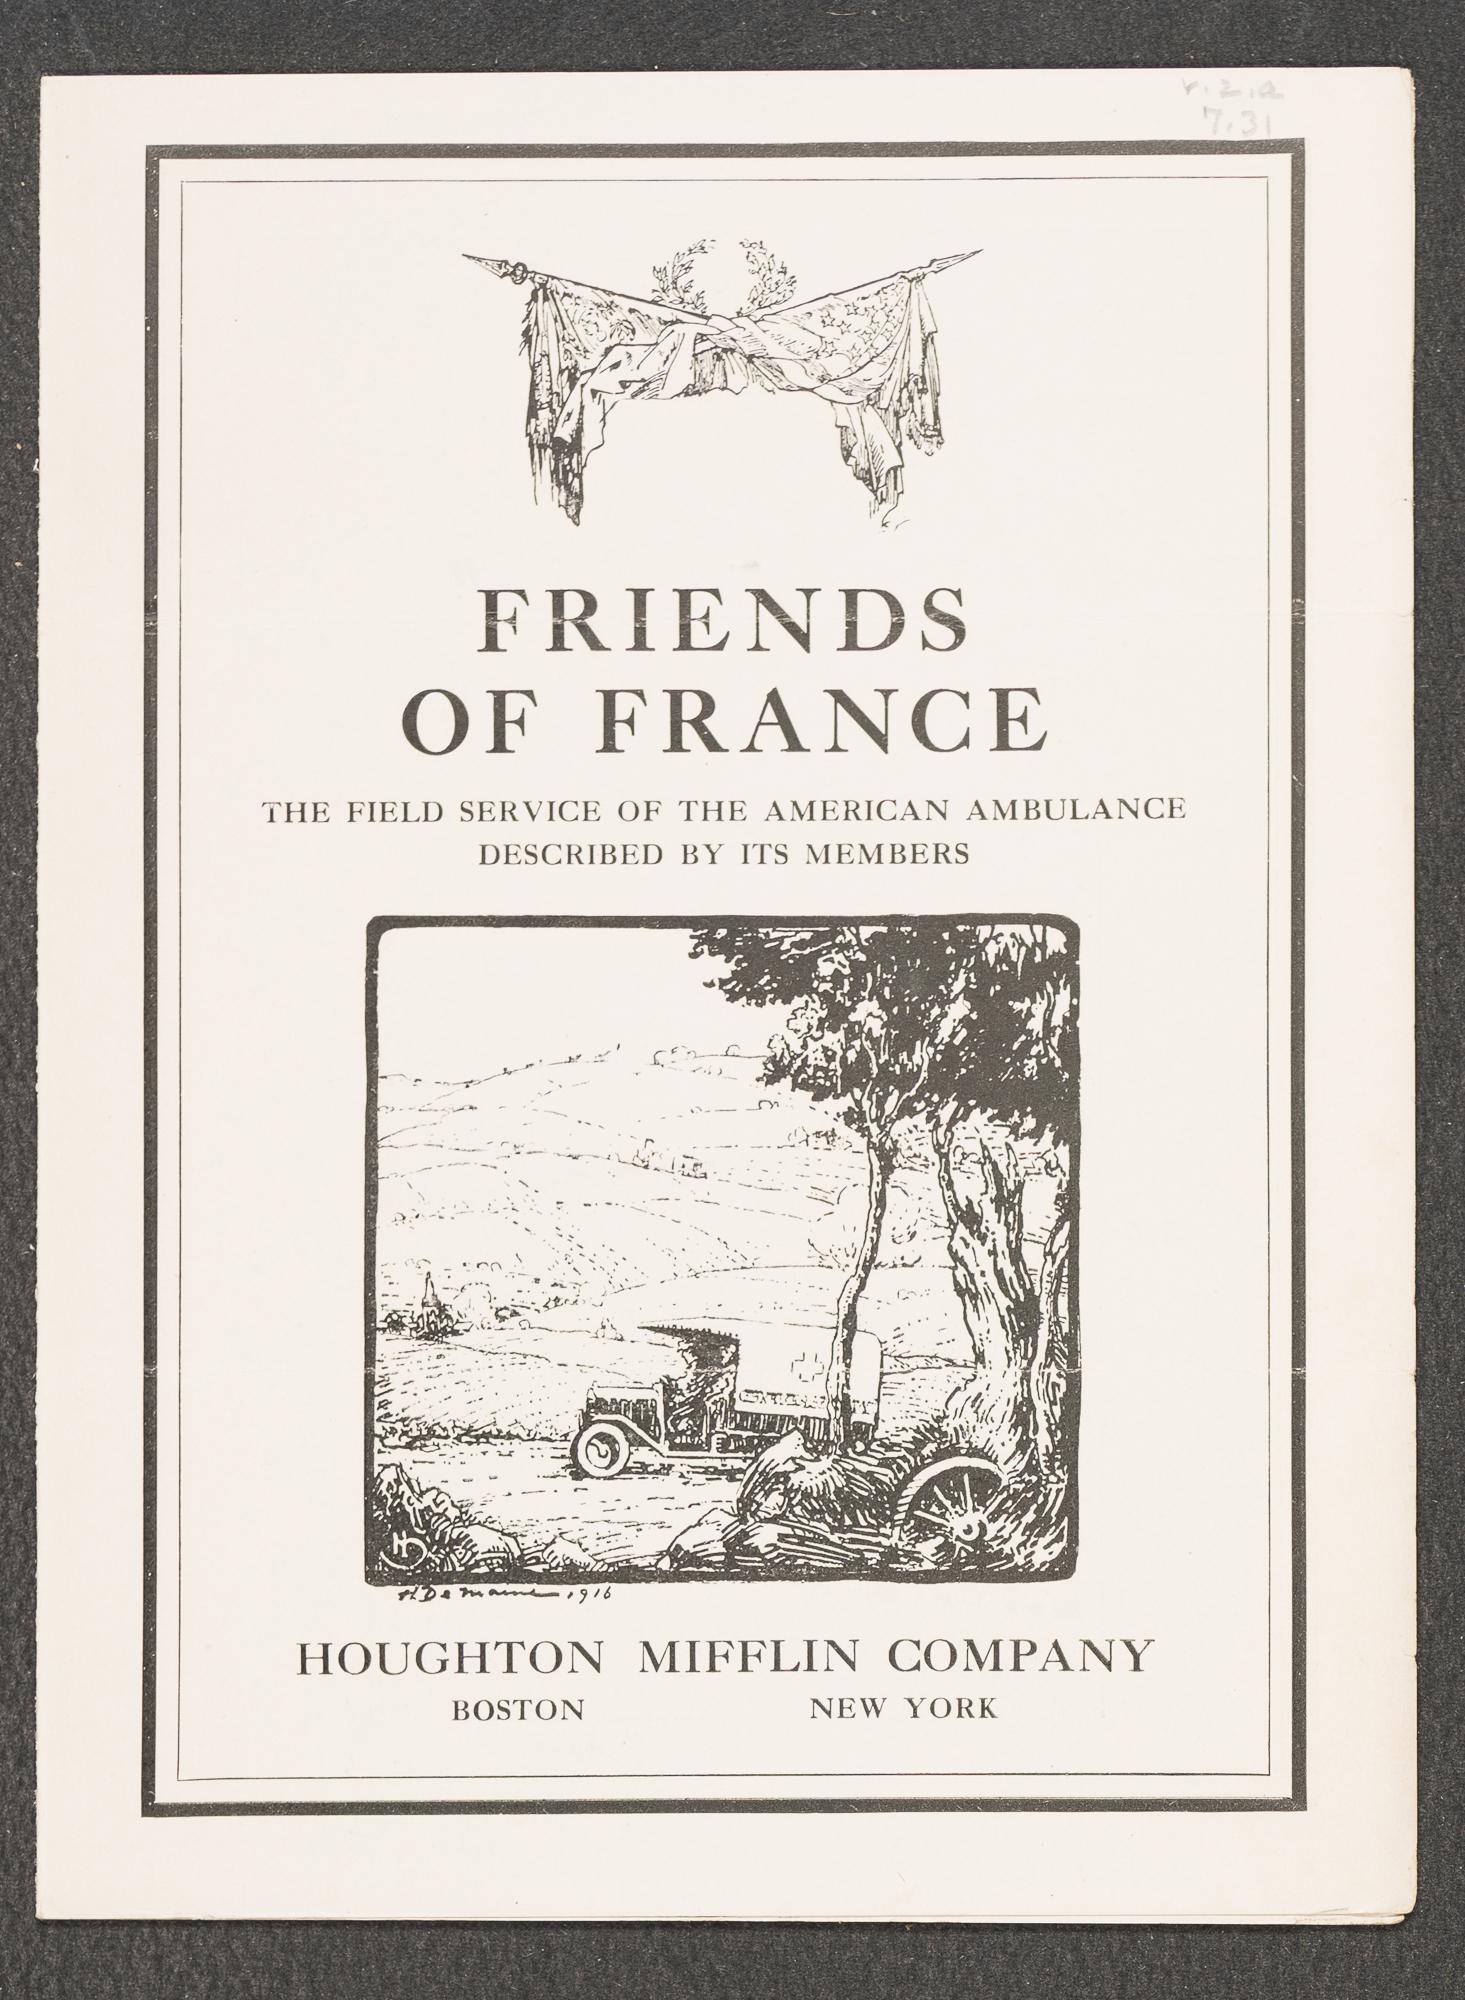 A pamphlet titled Friends of France.